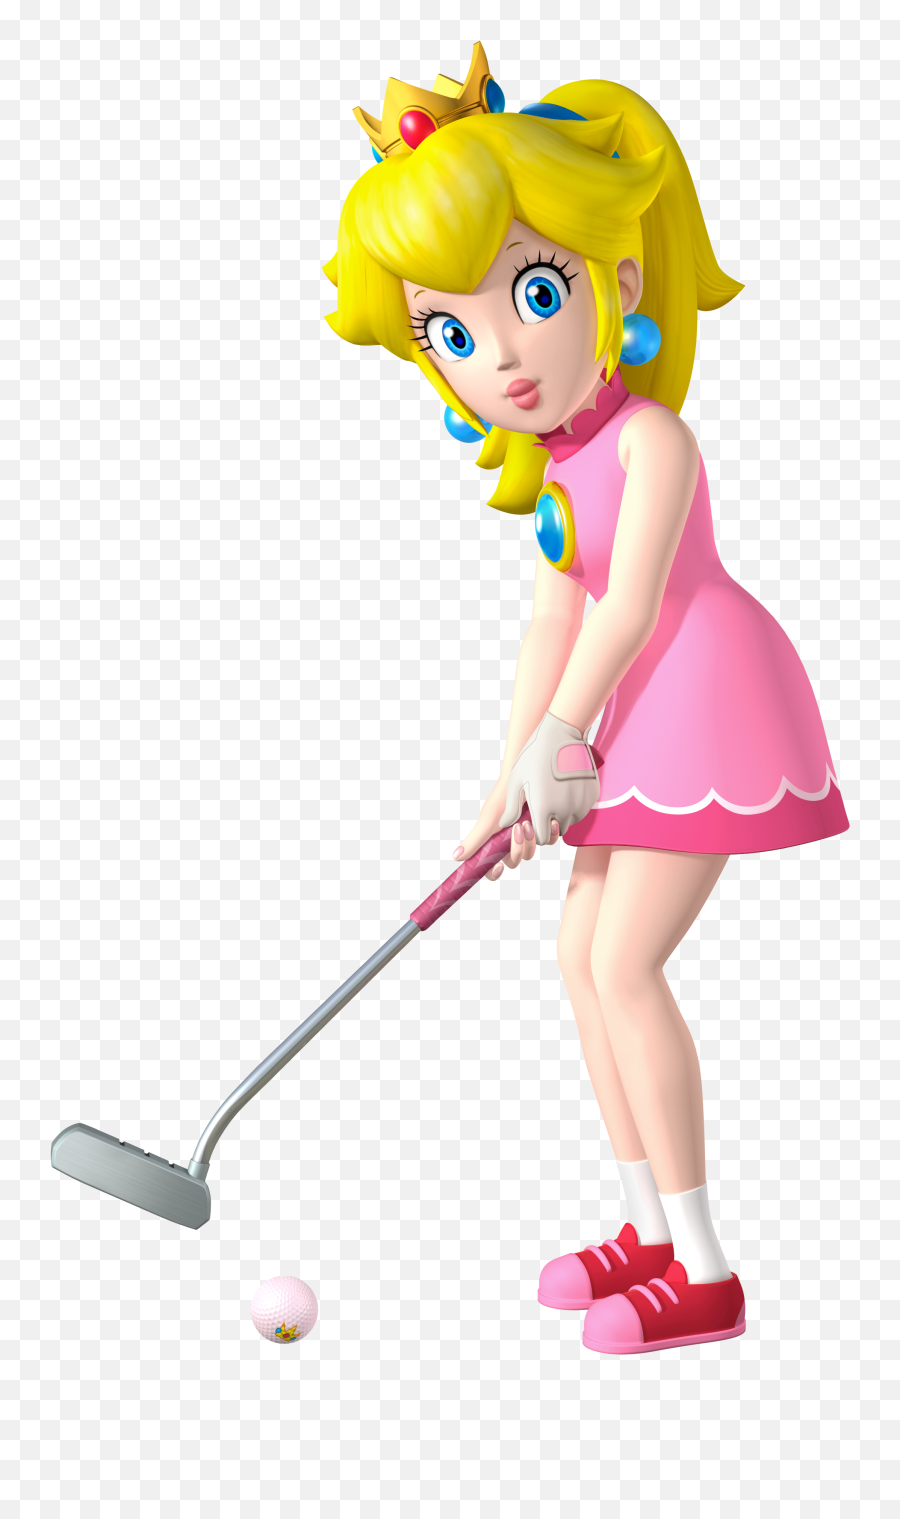 Image Result For Princess Peach And Mario Princess Peach Emoji,Princess Peach Clipart